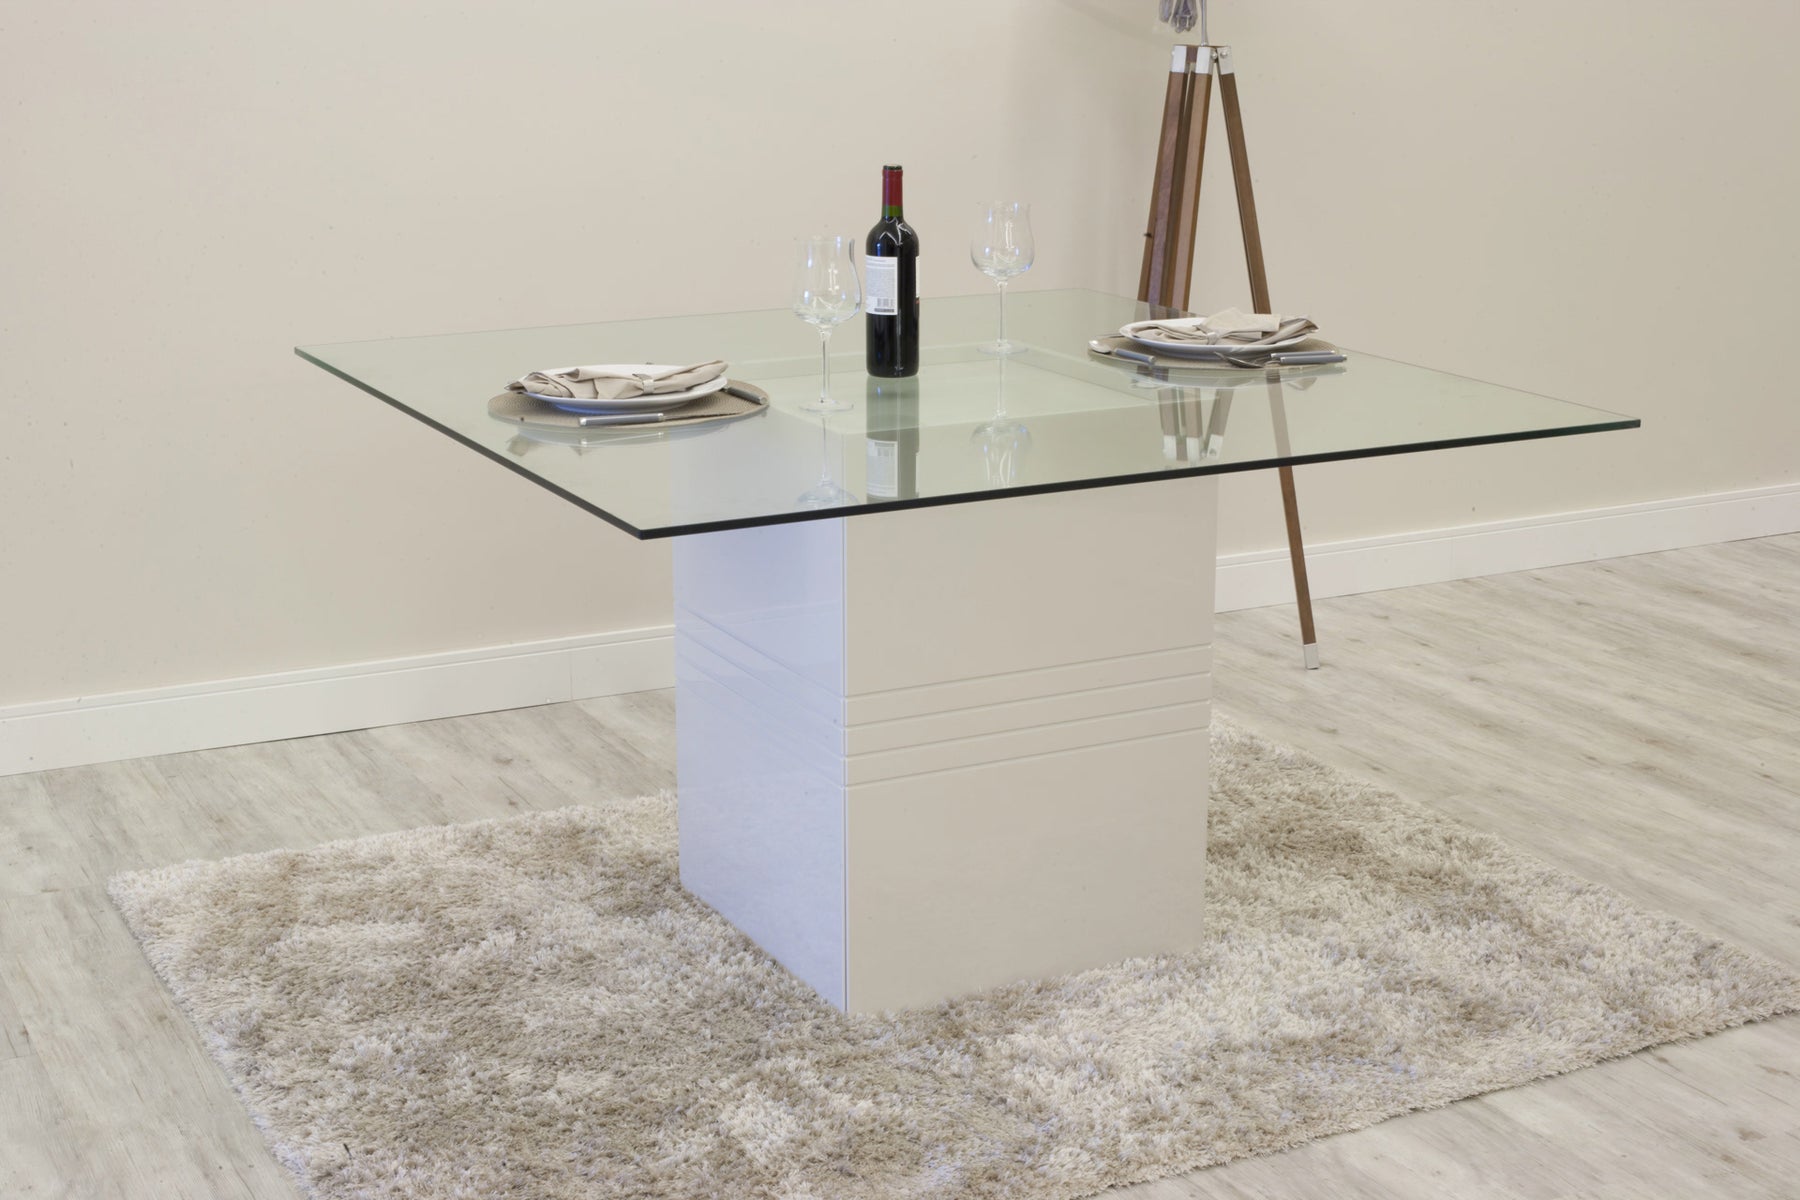 Manhattan Comfort Perry 1.8 - 55.12 in Sleek Tempered Glass Table Top in Off-White-Minimal & Modern